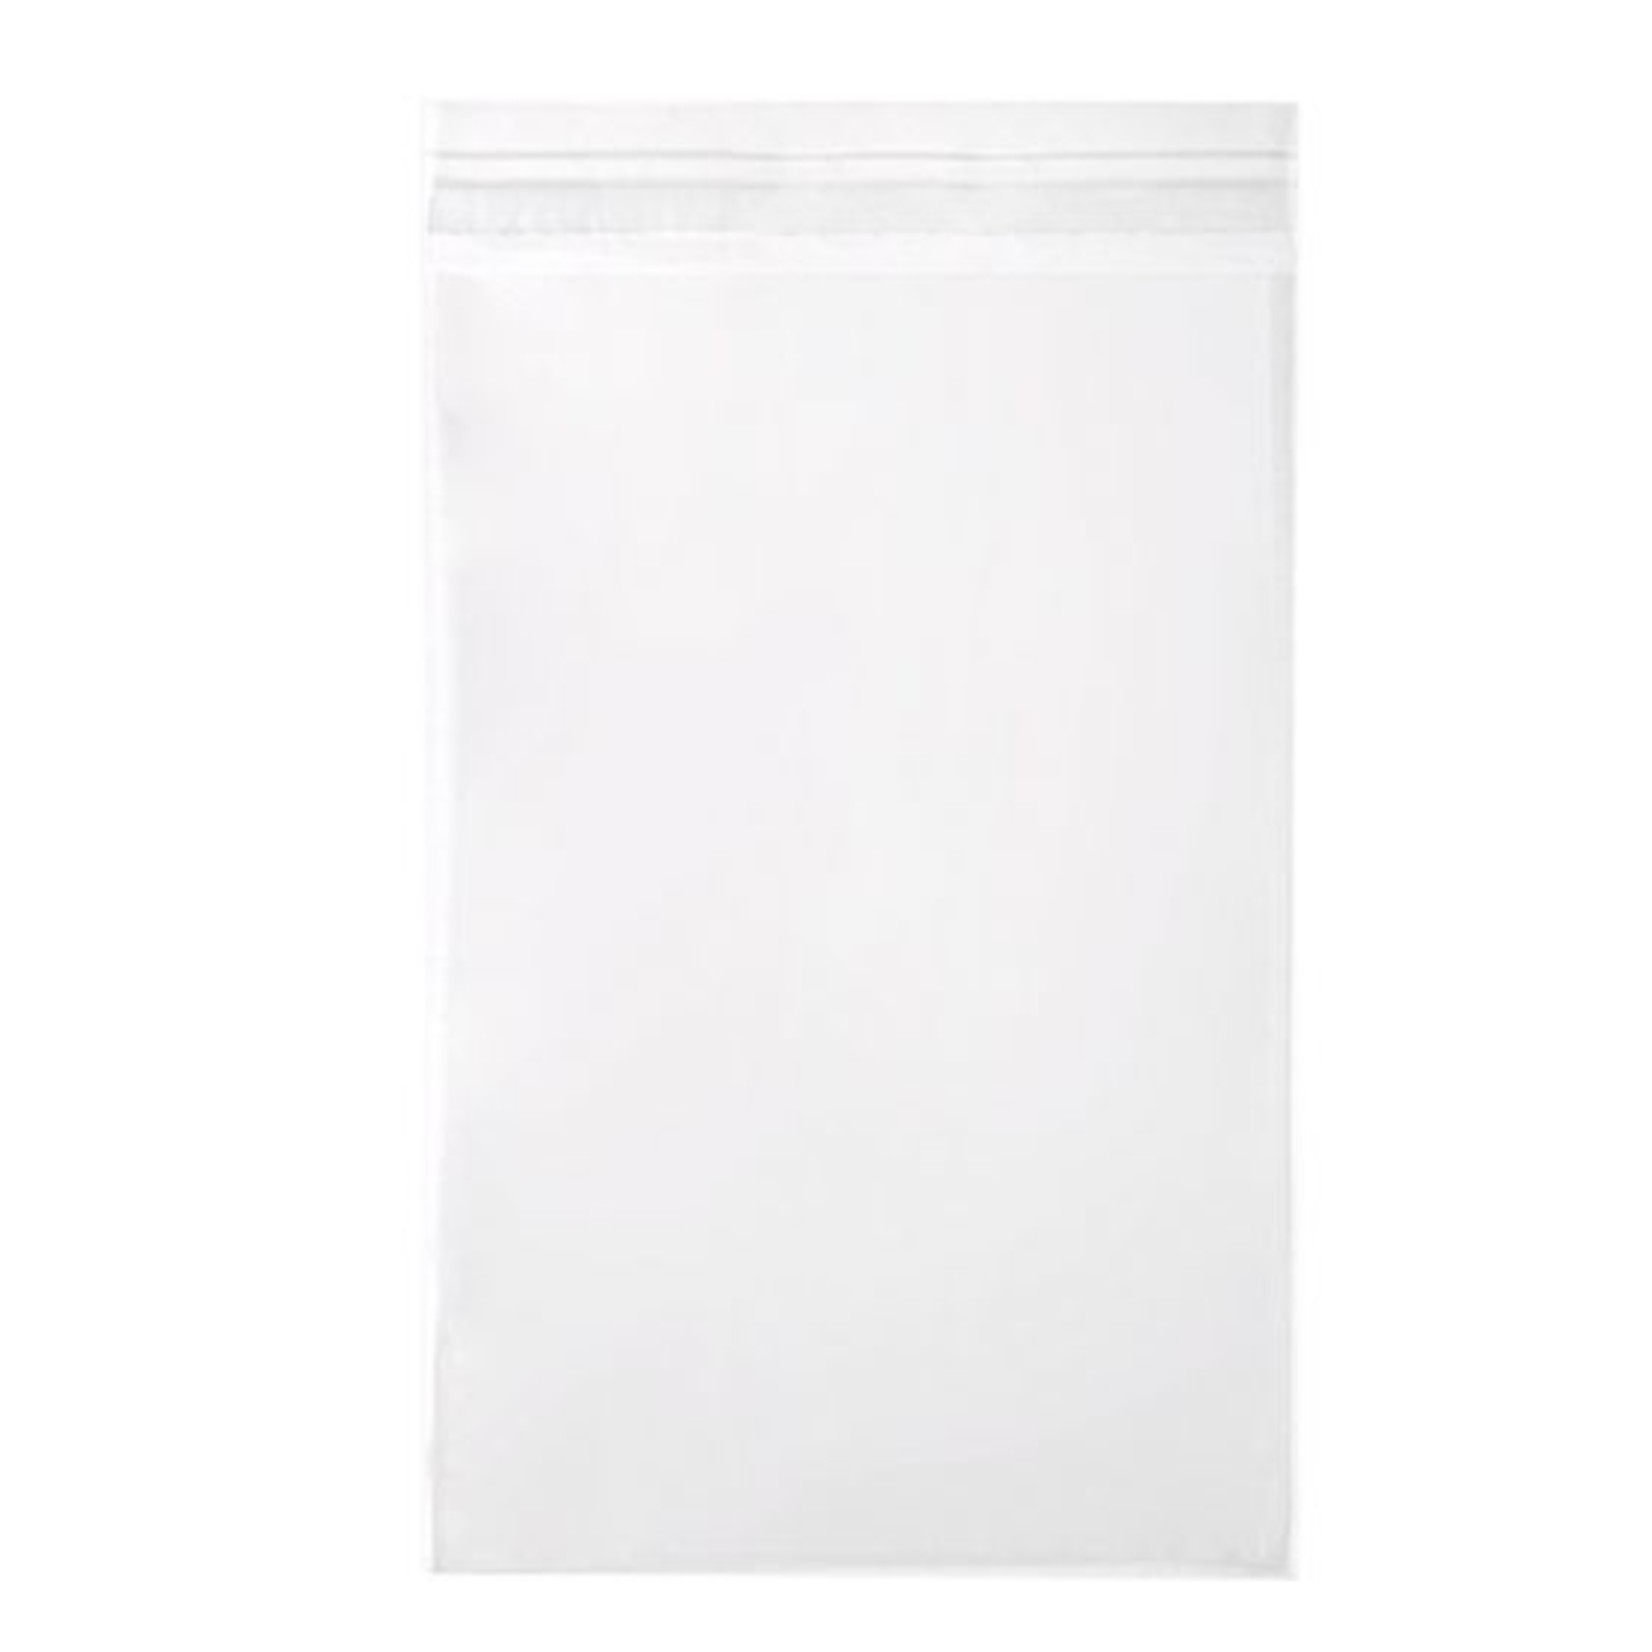 CLEARBAGS CLEAR BAG 6X8 EA